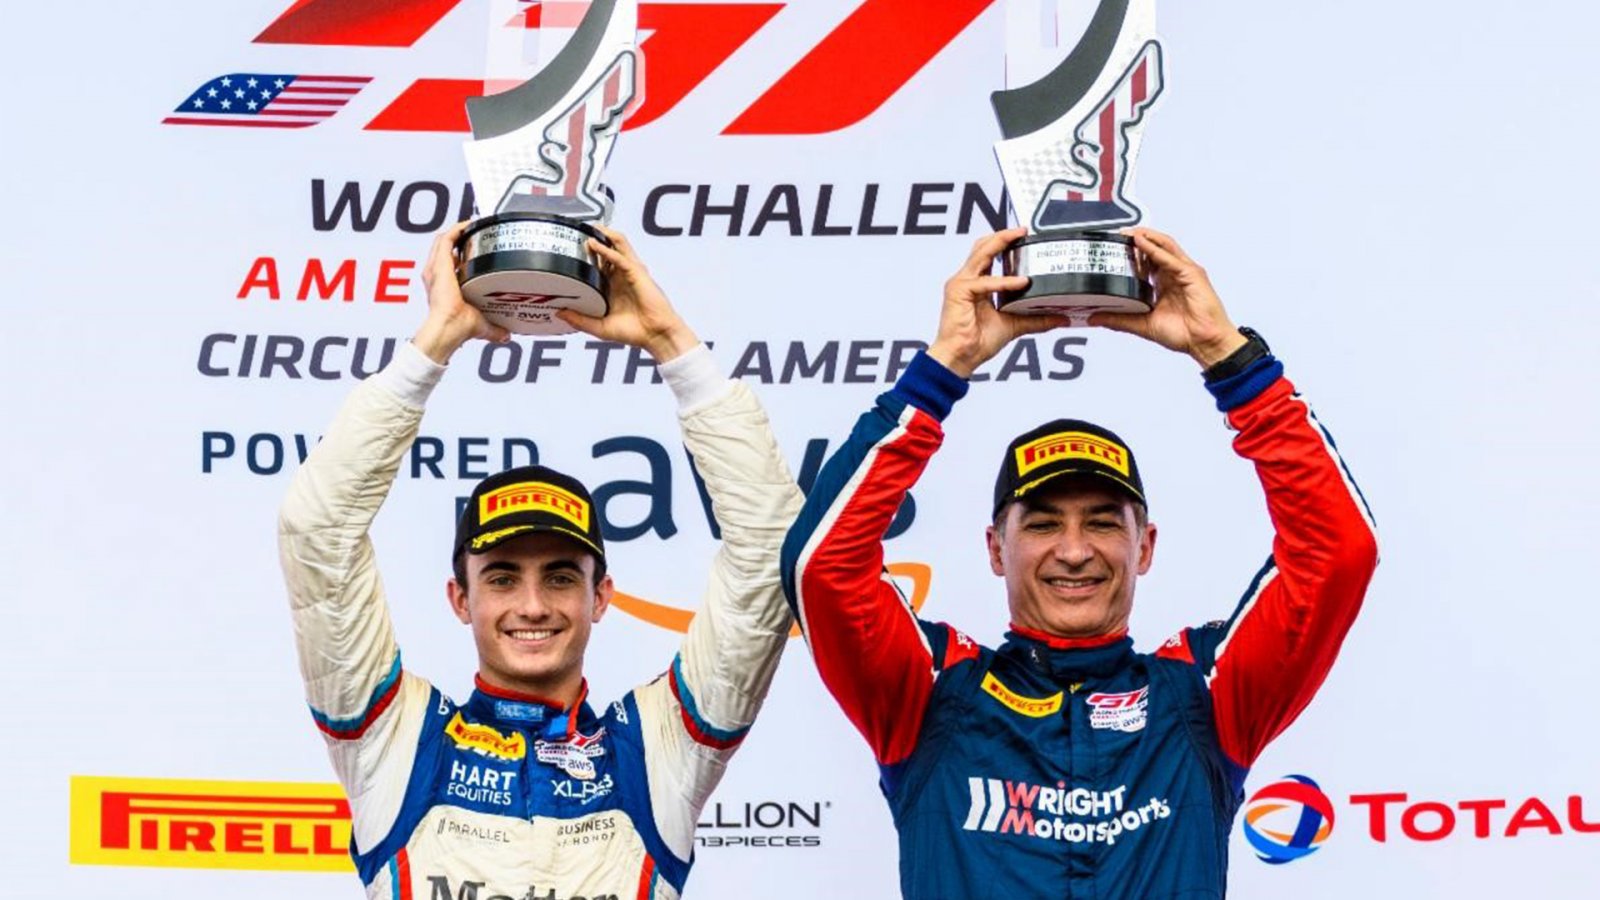 Wright Motorsports Sweeps Am Class in Austin GT World Challenge America